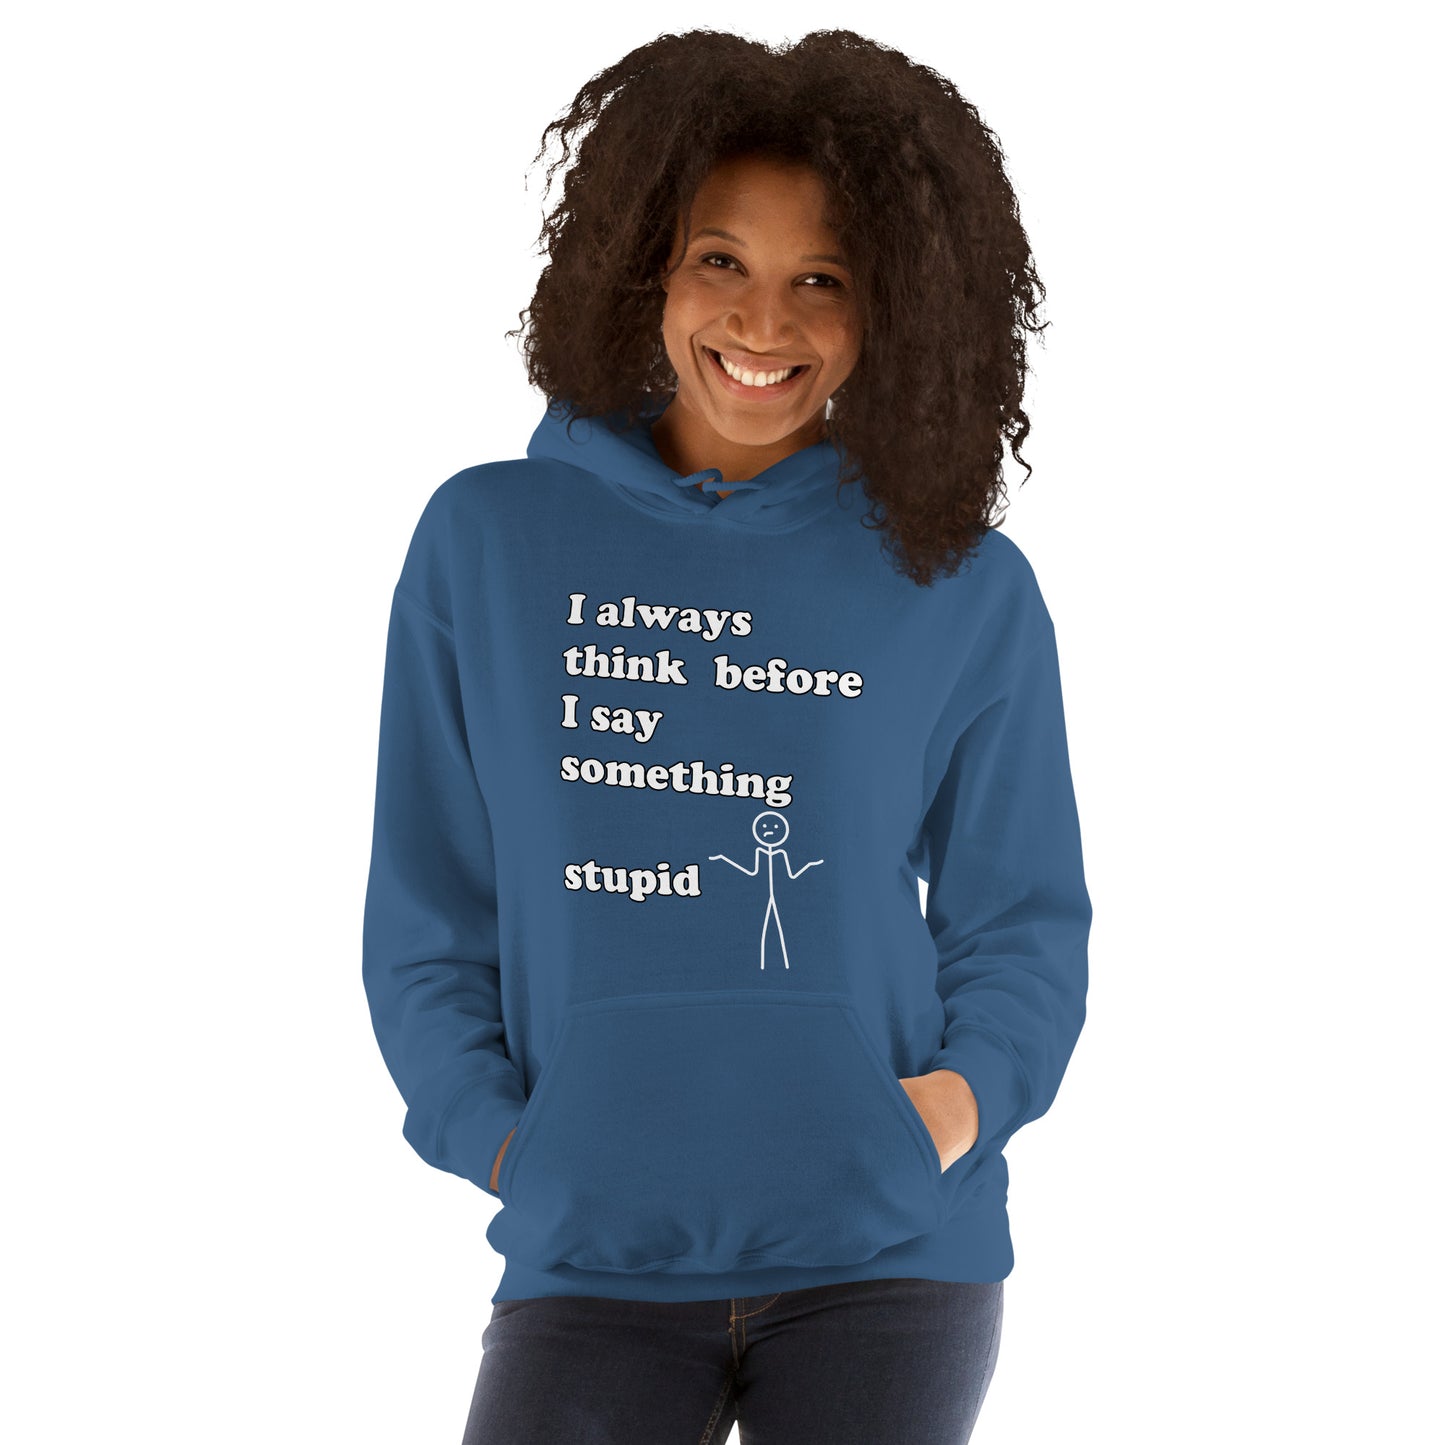 Woman with indigo blue hoodie with text "I always think before I say something stupid"